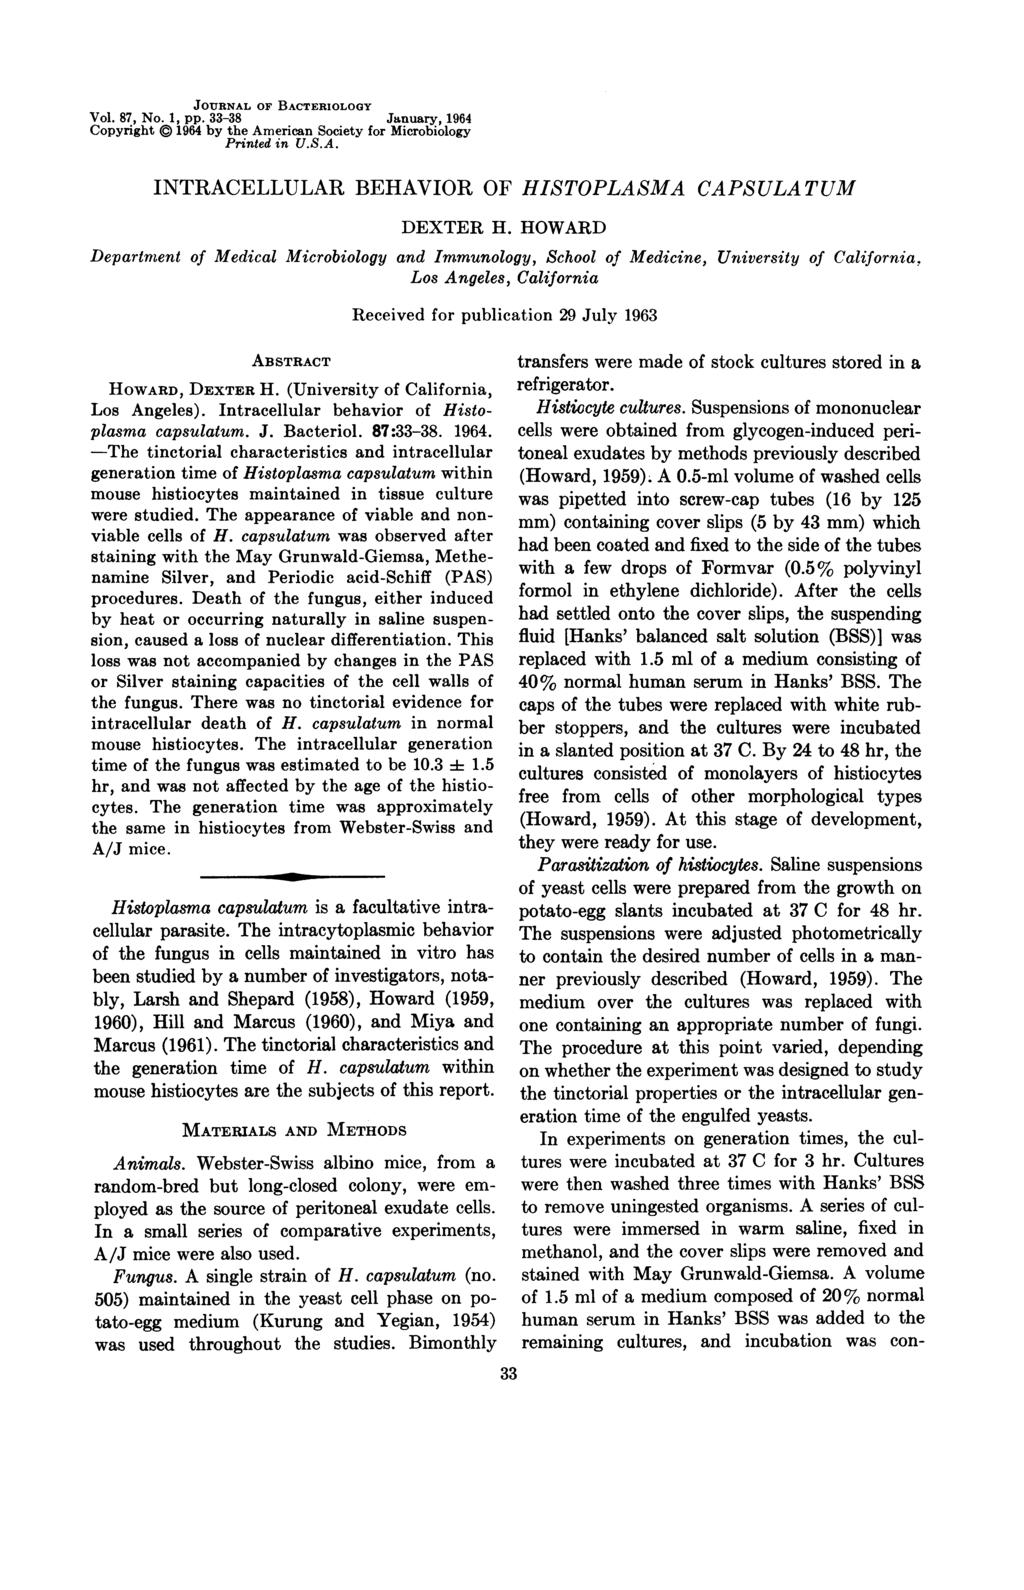 JOIURNAL OF BACTERIOLOGY Vol. 87, No. 1, pp. 33-38 January, 1964 Copyright 1964 by the American Society for Microbiology Printed in U.S.A. INTRACELLULAR BEHAVIOR OF HISTOPLASMA CAPSULATUM DEXTER H.